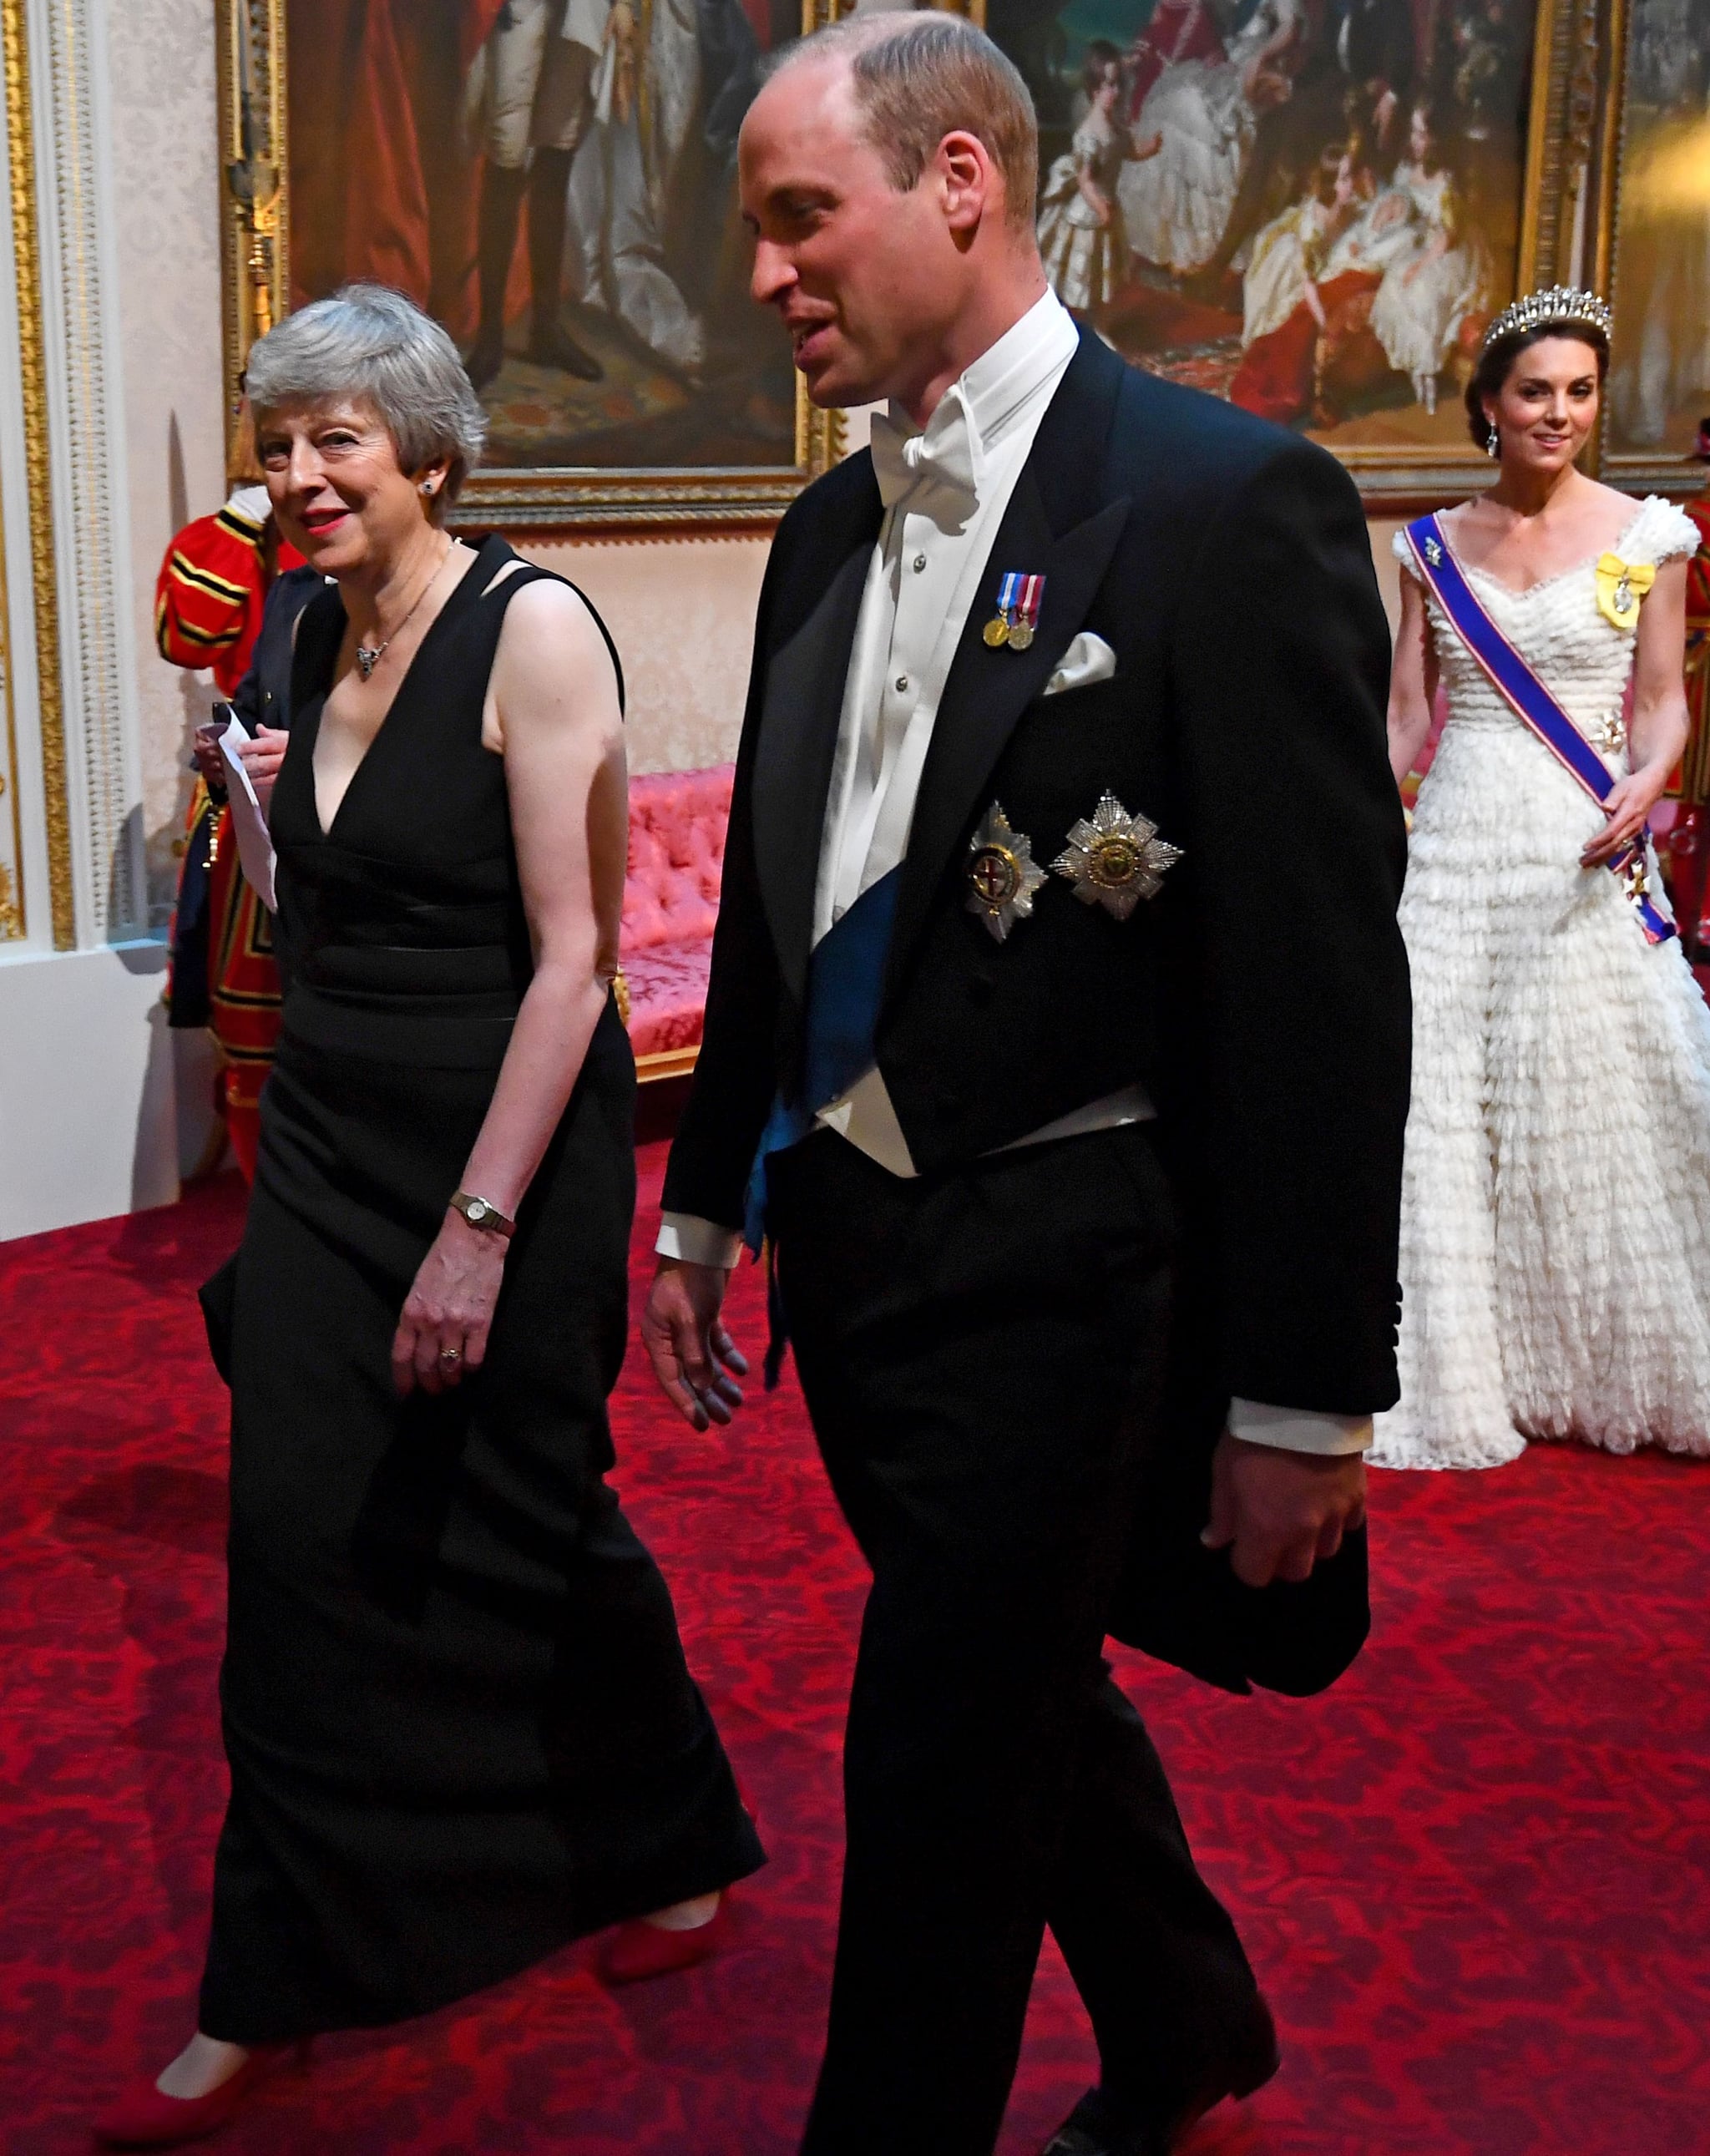 Prince William and Kate Middleton at State Banquet June 2019